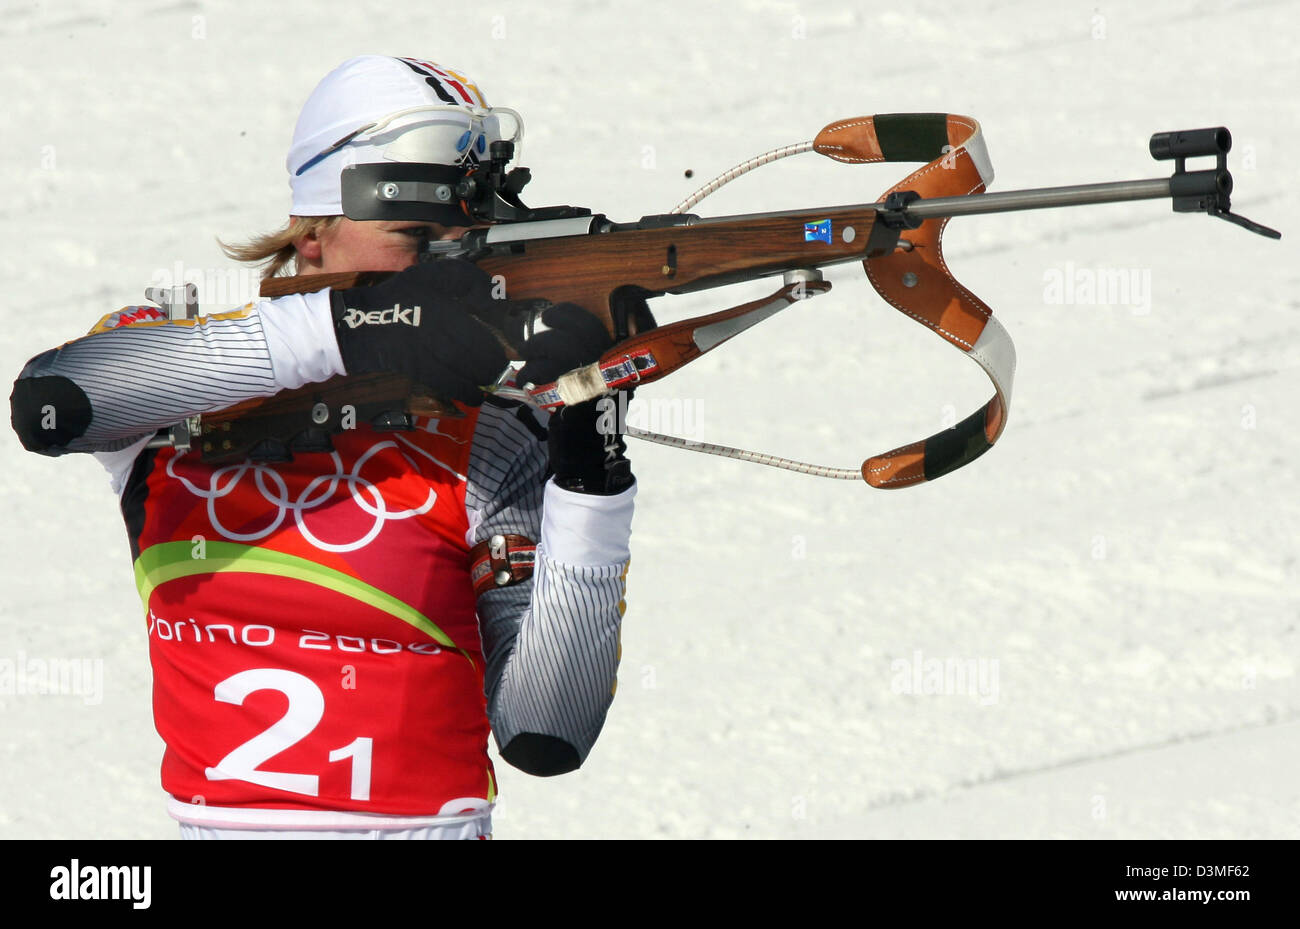 German biathlete Martina Glagow aims with her rifle as she stands at the shooting range in the Women's 4 x 6km Biathlon Relay at the Olympic Winter Games in San Sicario, Italy, Thursday, 23 February 2006. The German team won silver. Photo:  Martin Schutt Stock Photo